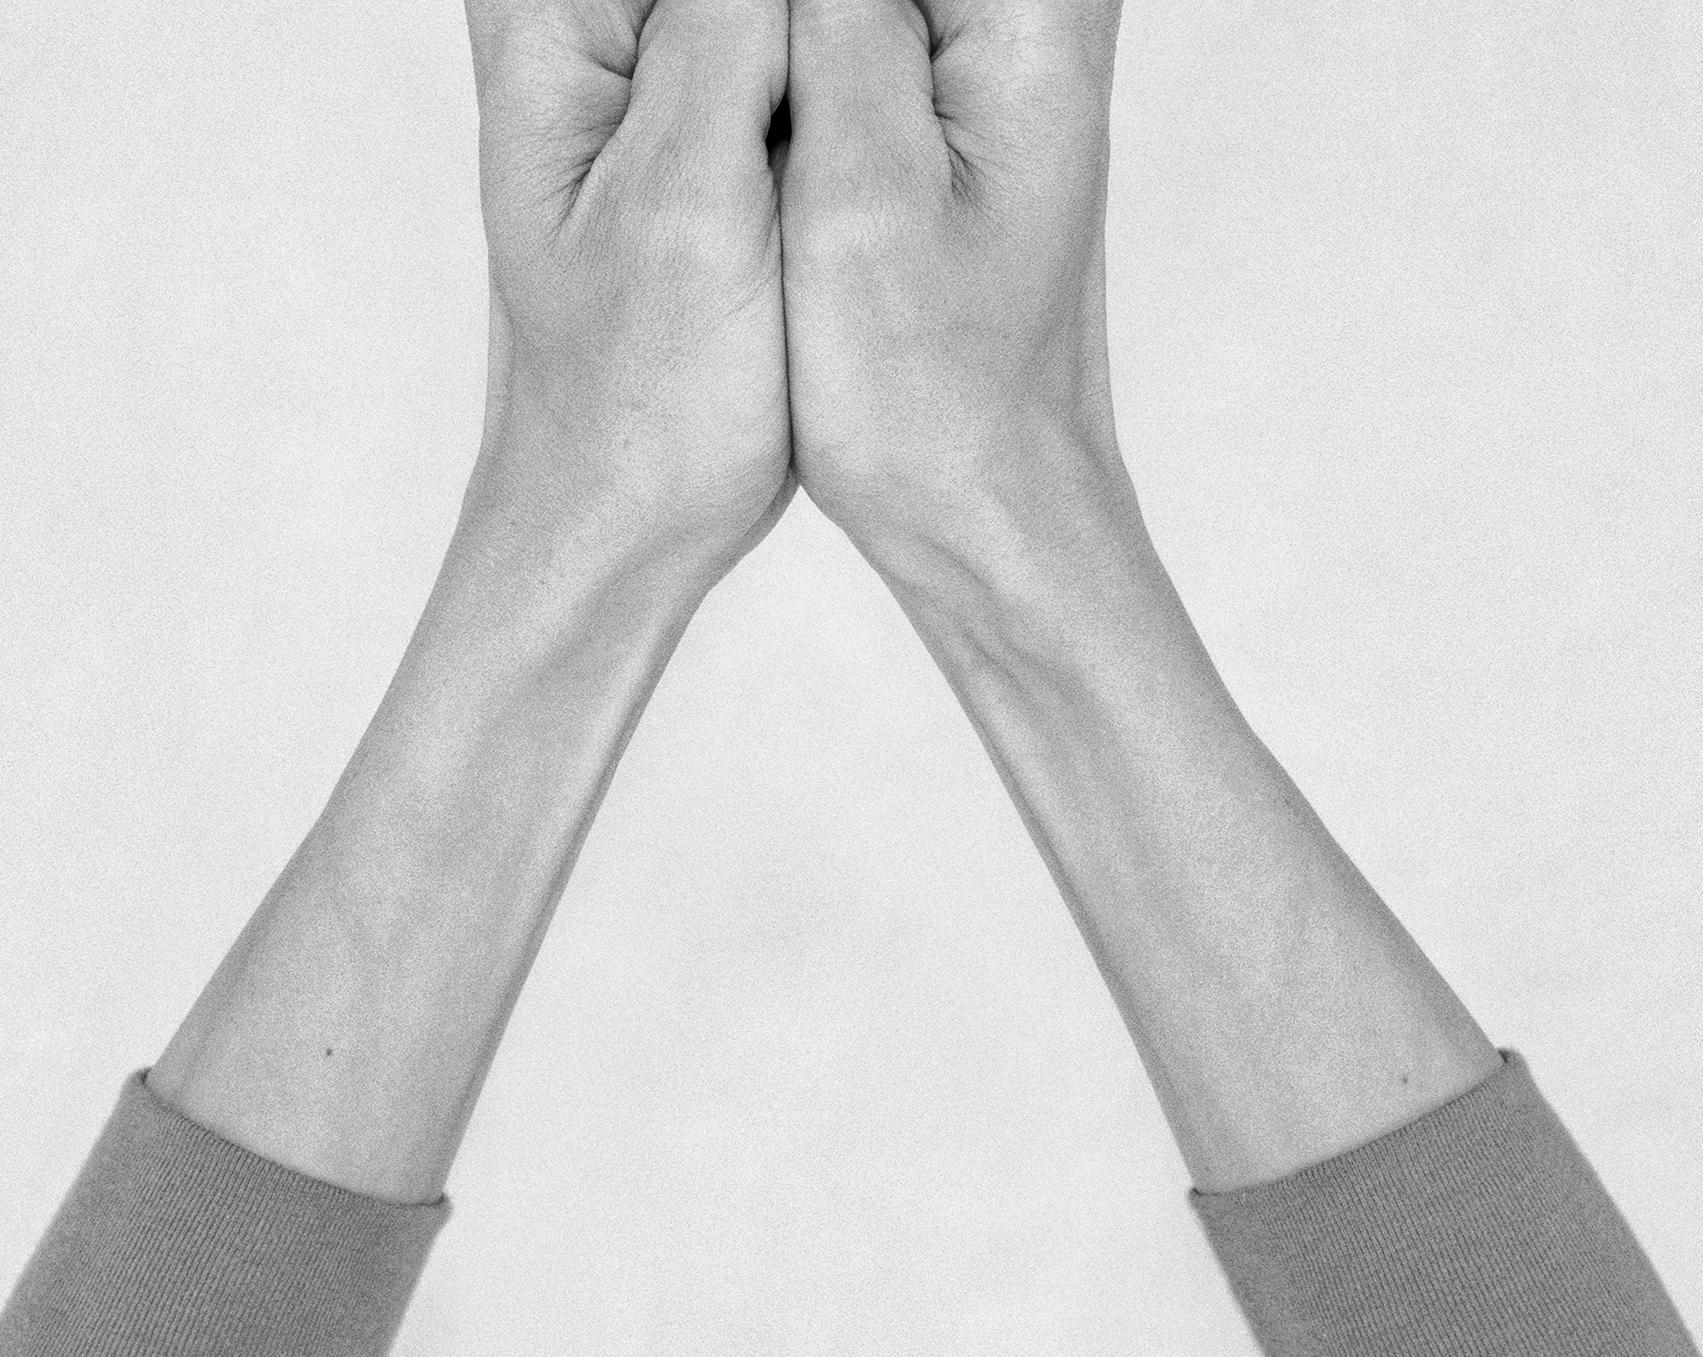 Untitled XXVI. From the Series Chiromorphose. Hands. Black & White Photography For Sale 1